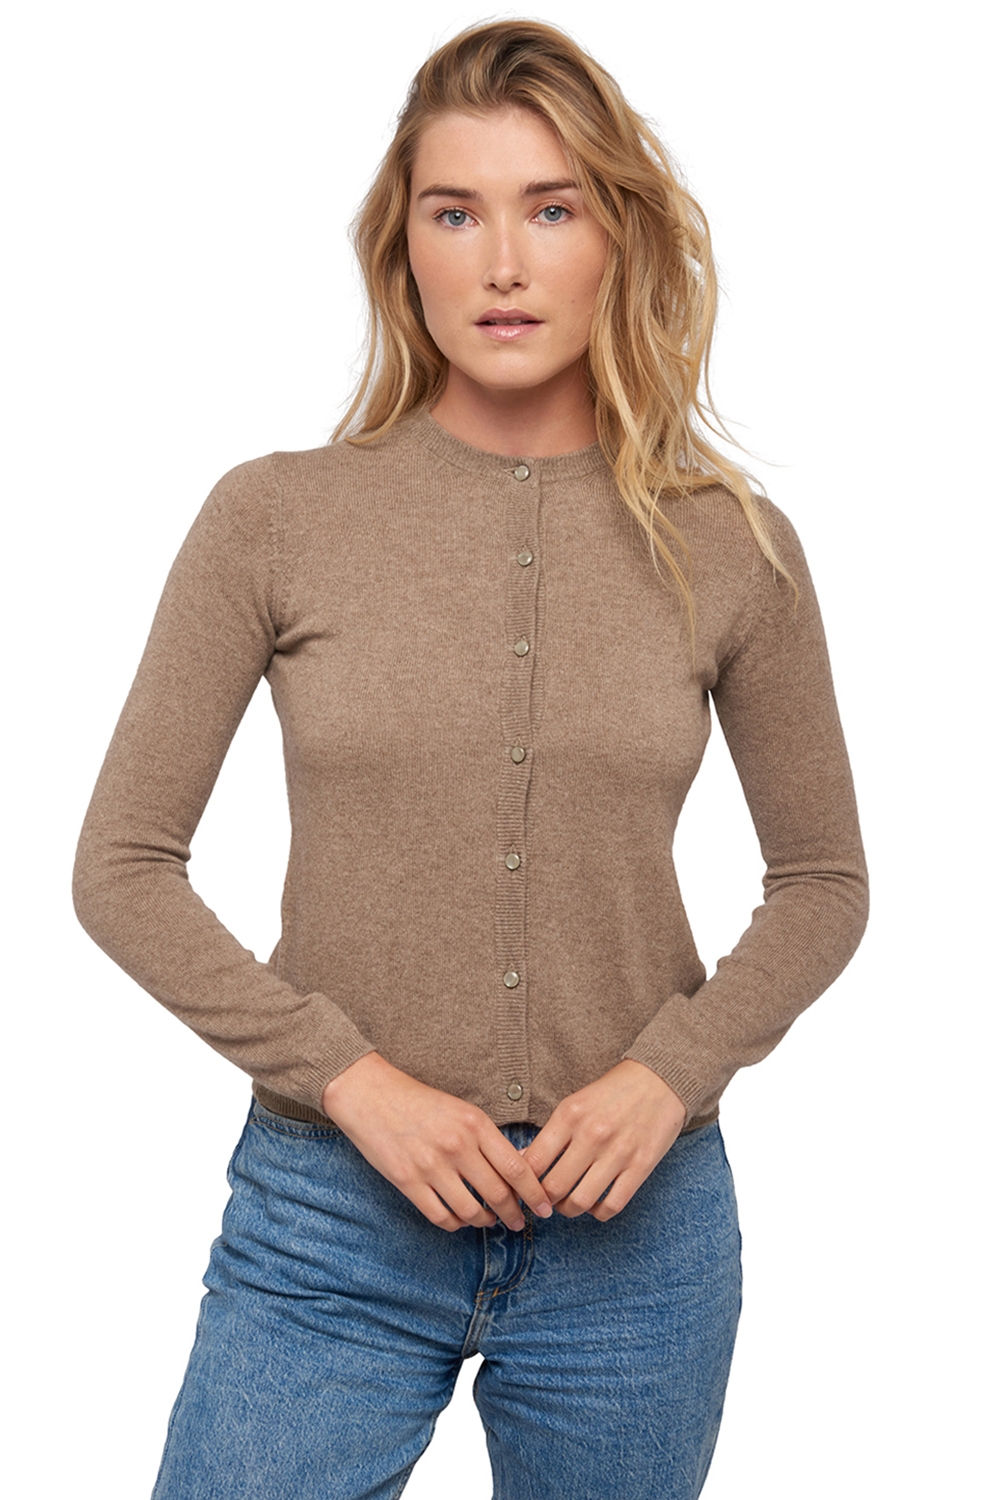 Cachemire pull femme chloe natural brown l